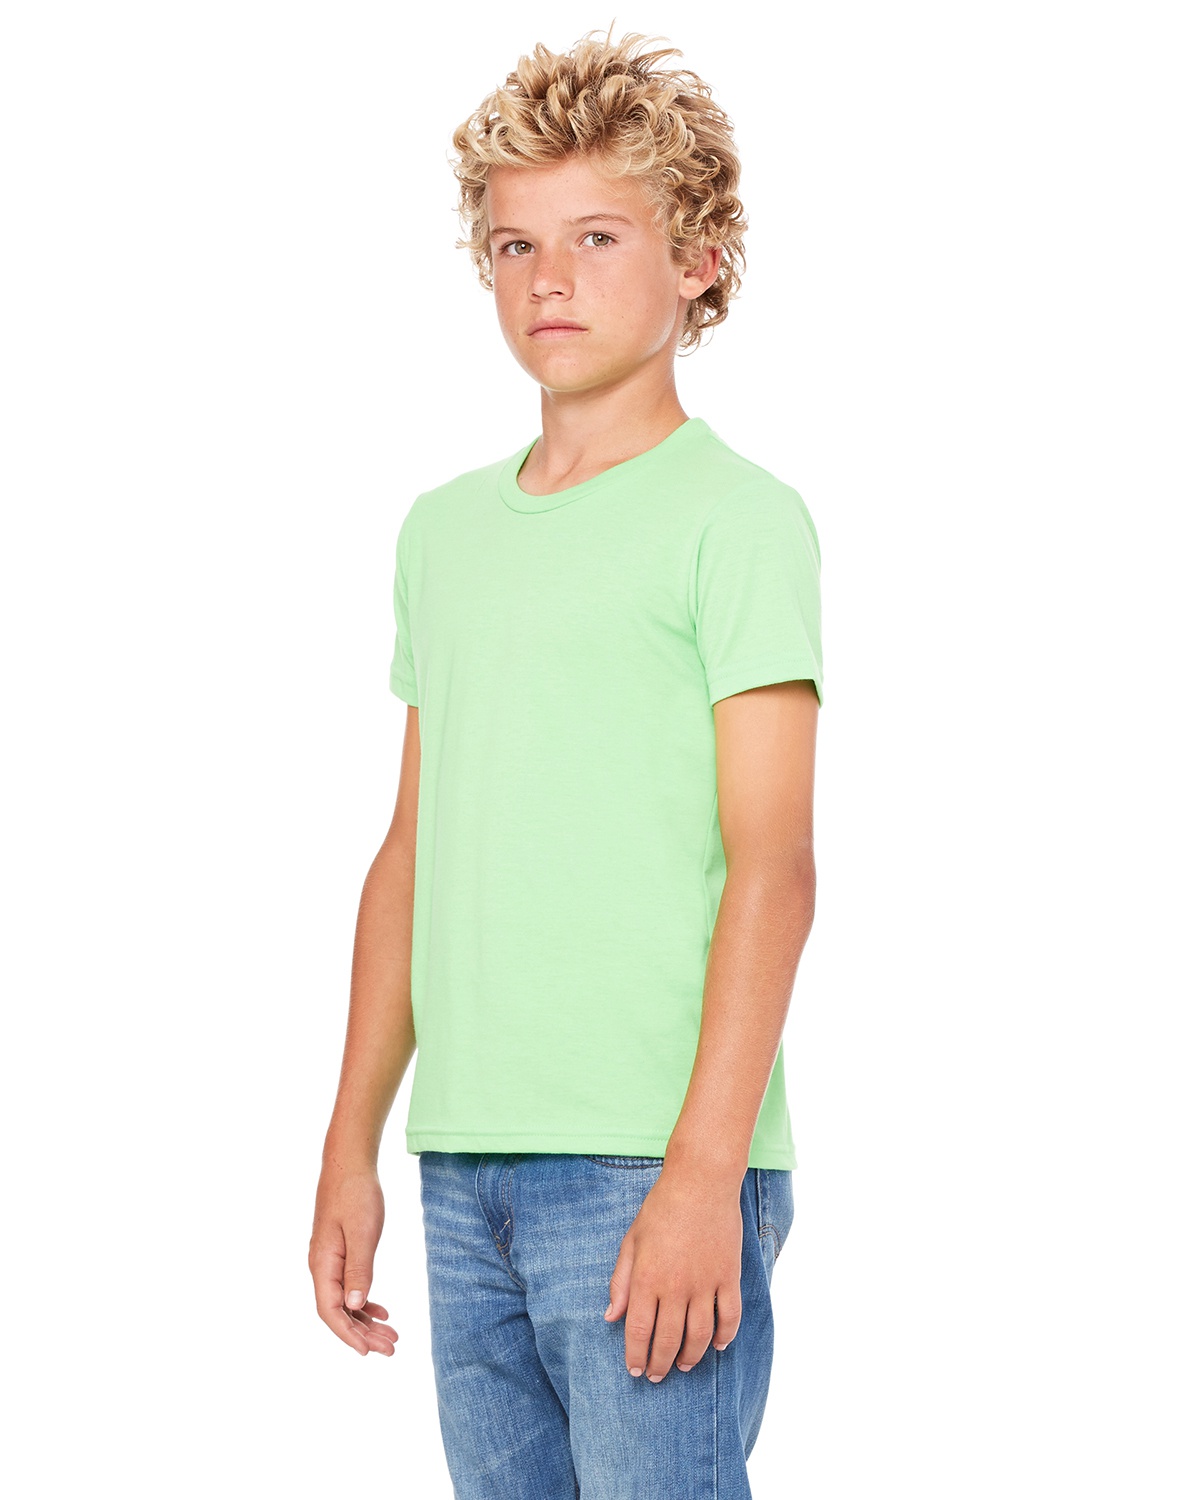 'Bella Canvas 3001Y Youth Jersey T Shirt'